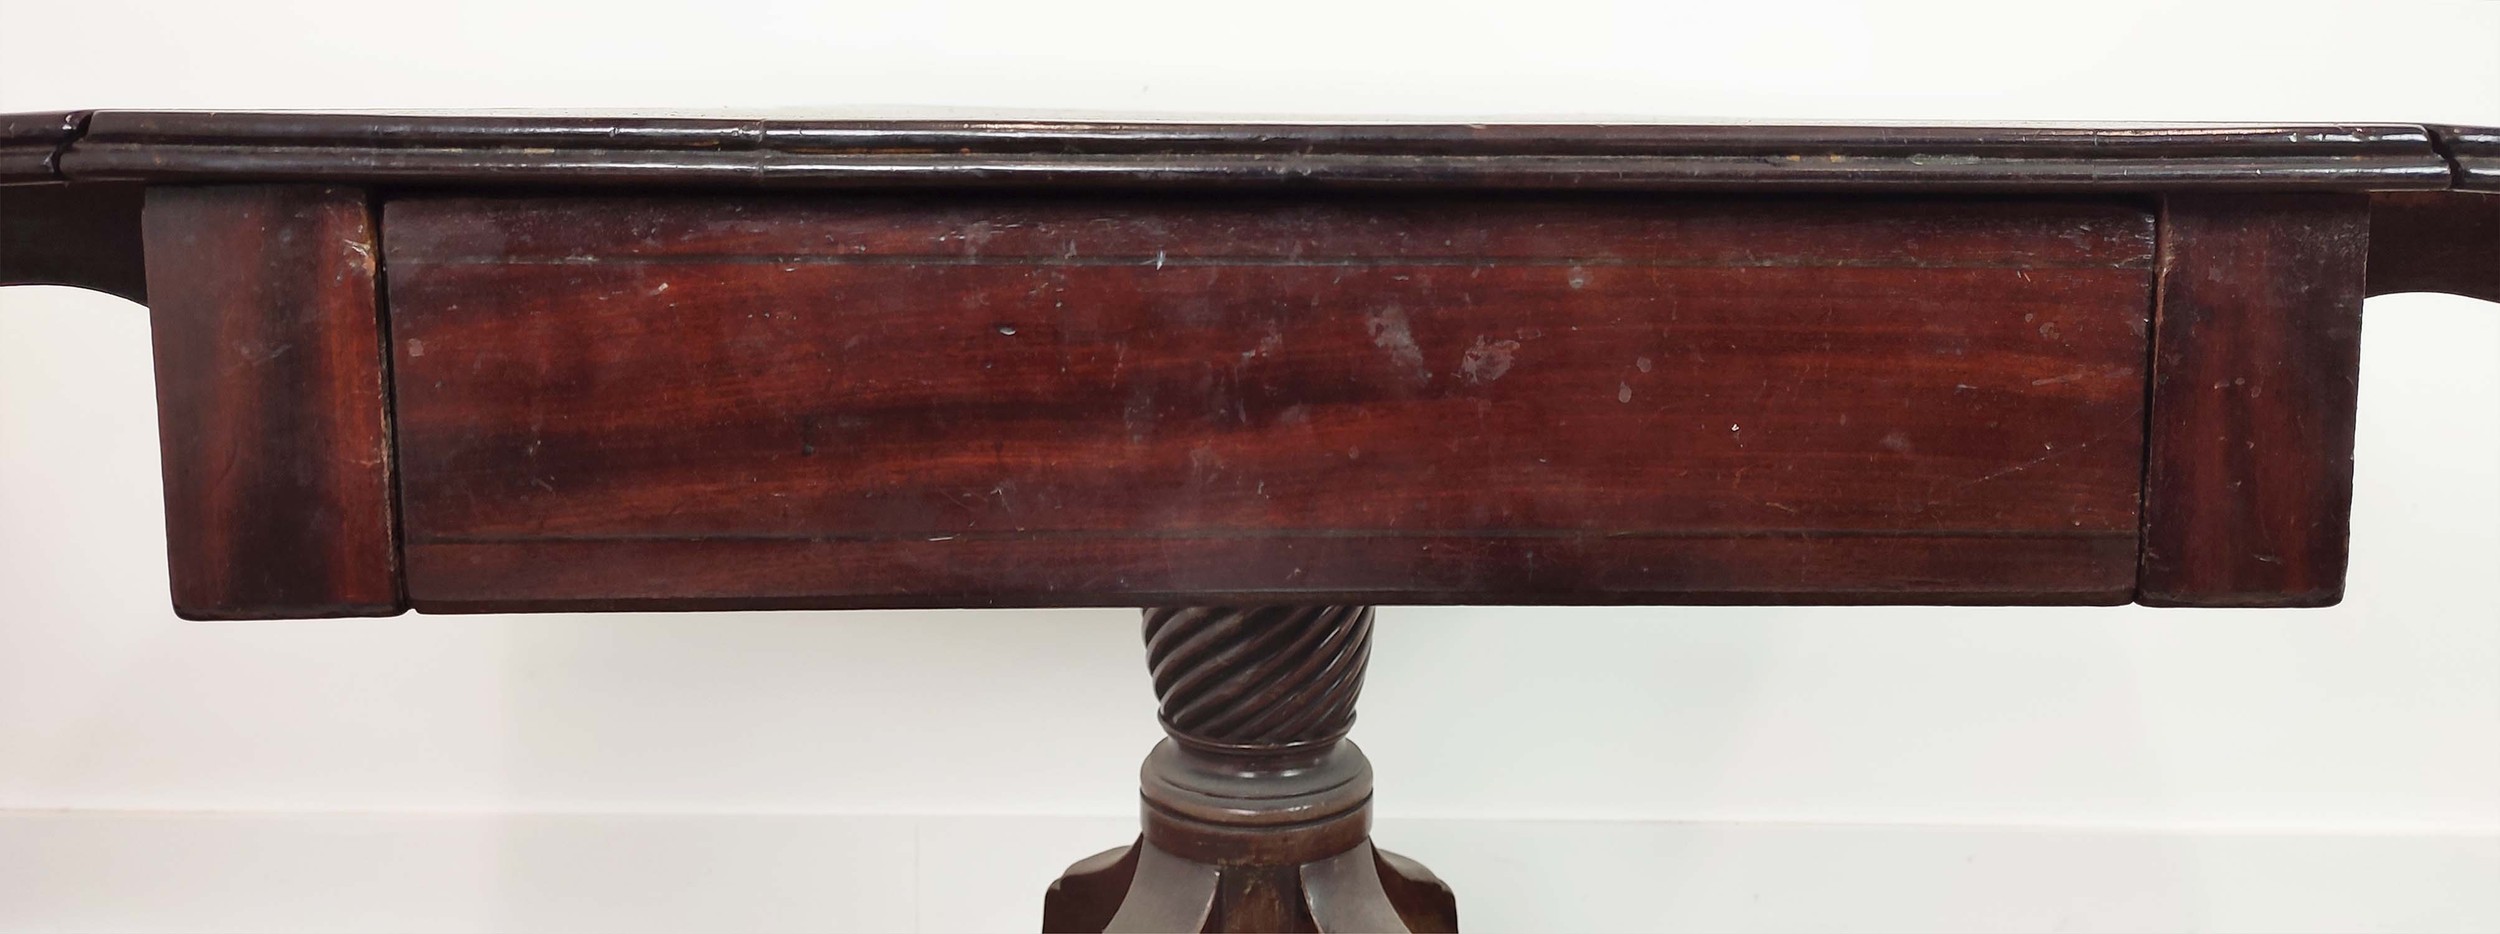 PEDESTAL PEMBROKE TABLE, Regency mahogany with a pair of drop leaves and drawer on reeded quadraform - Image 16 of 18